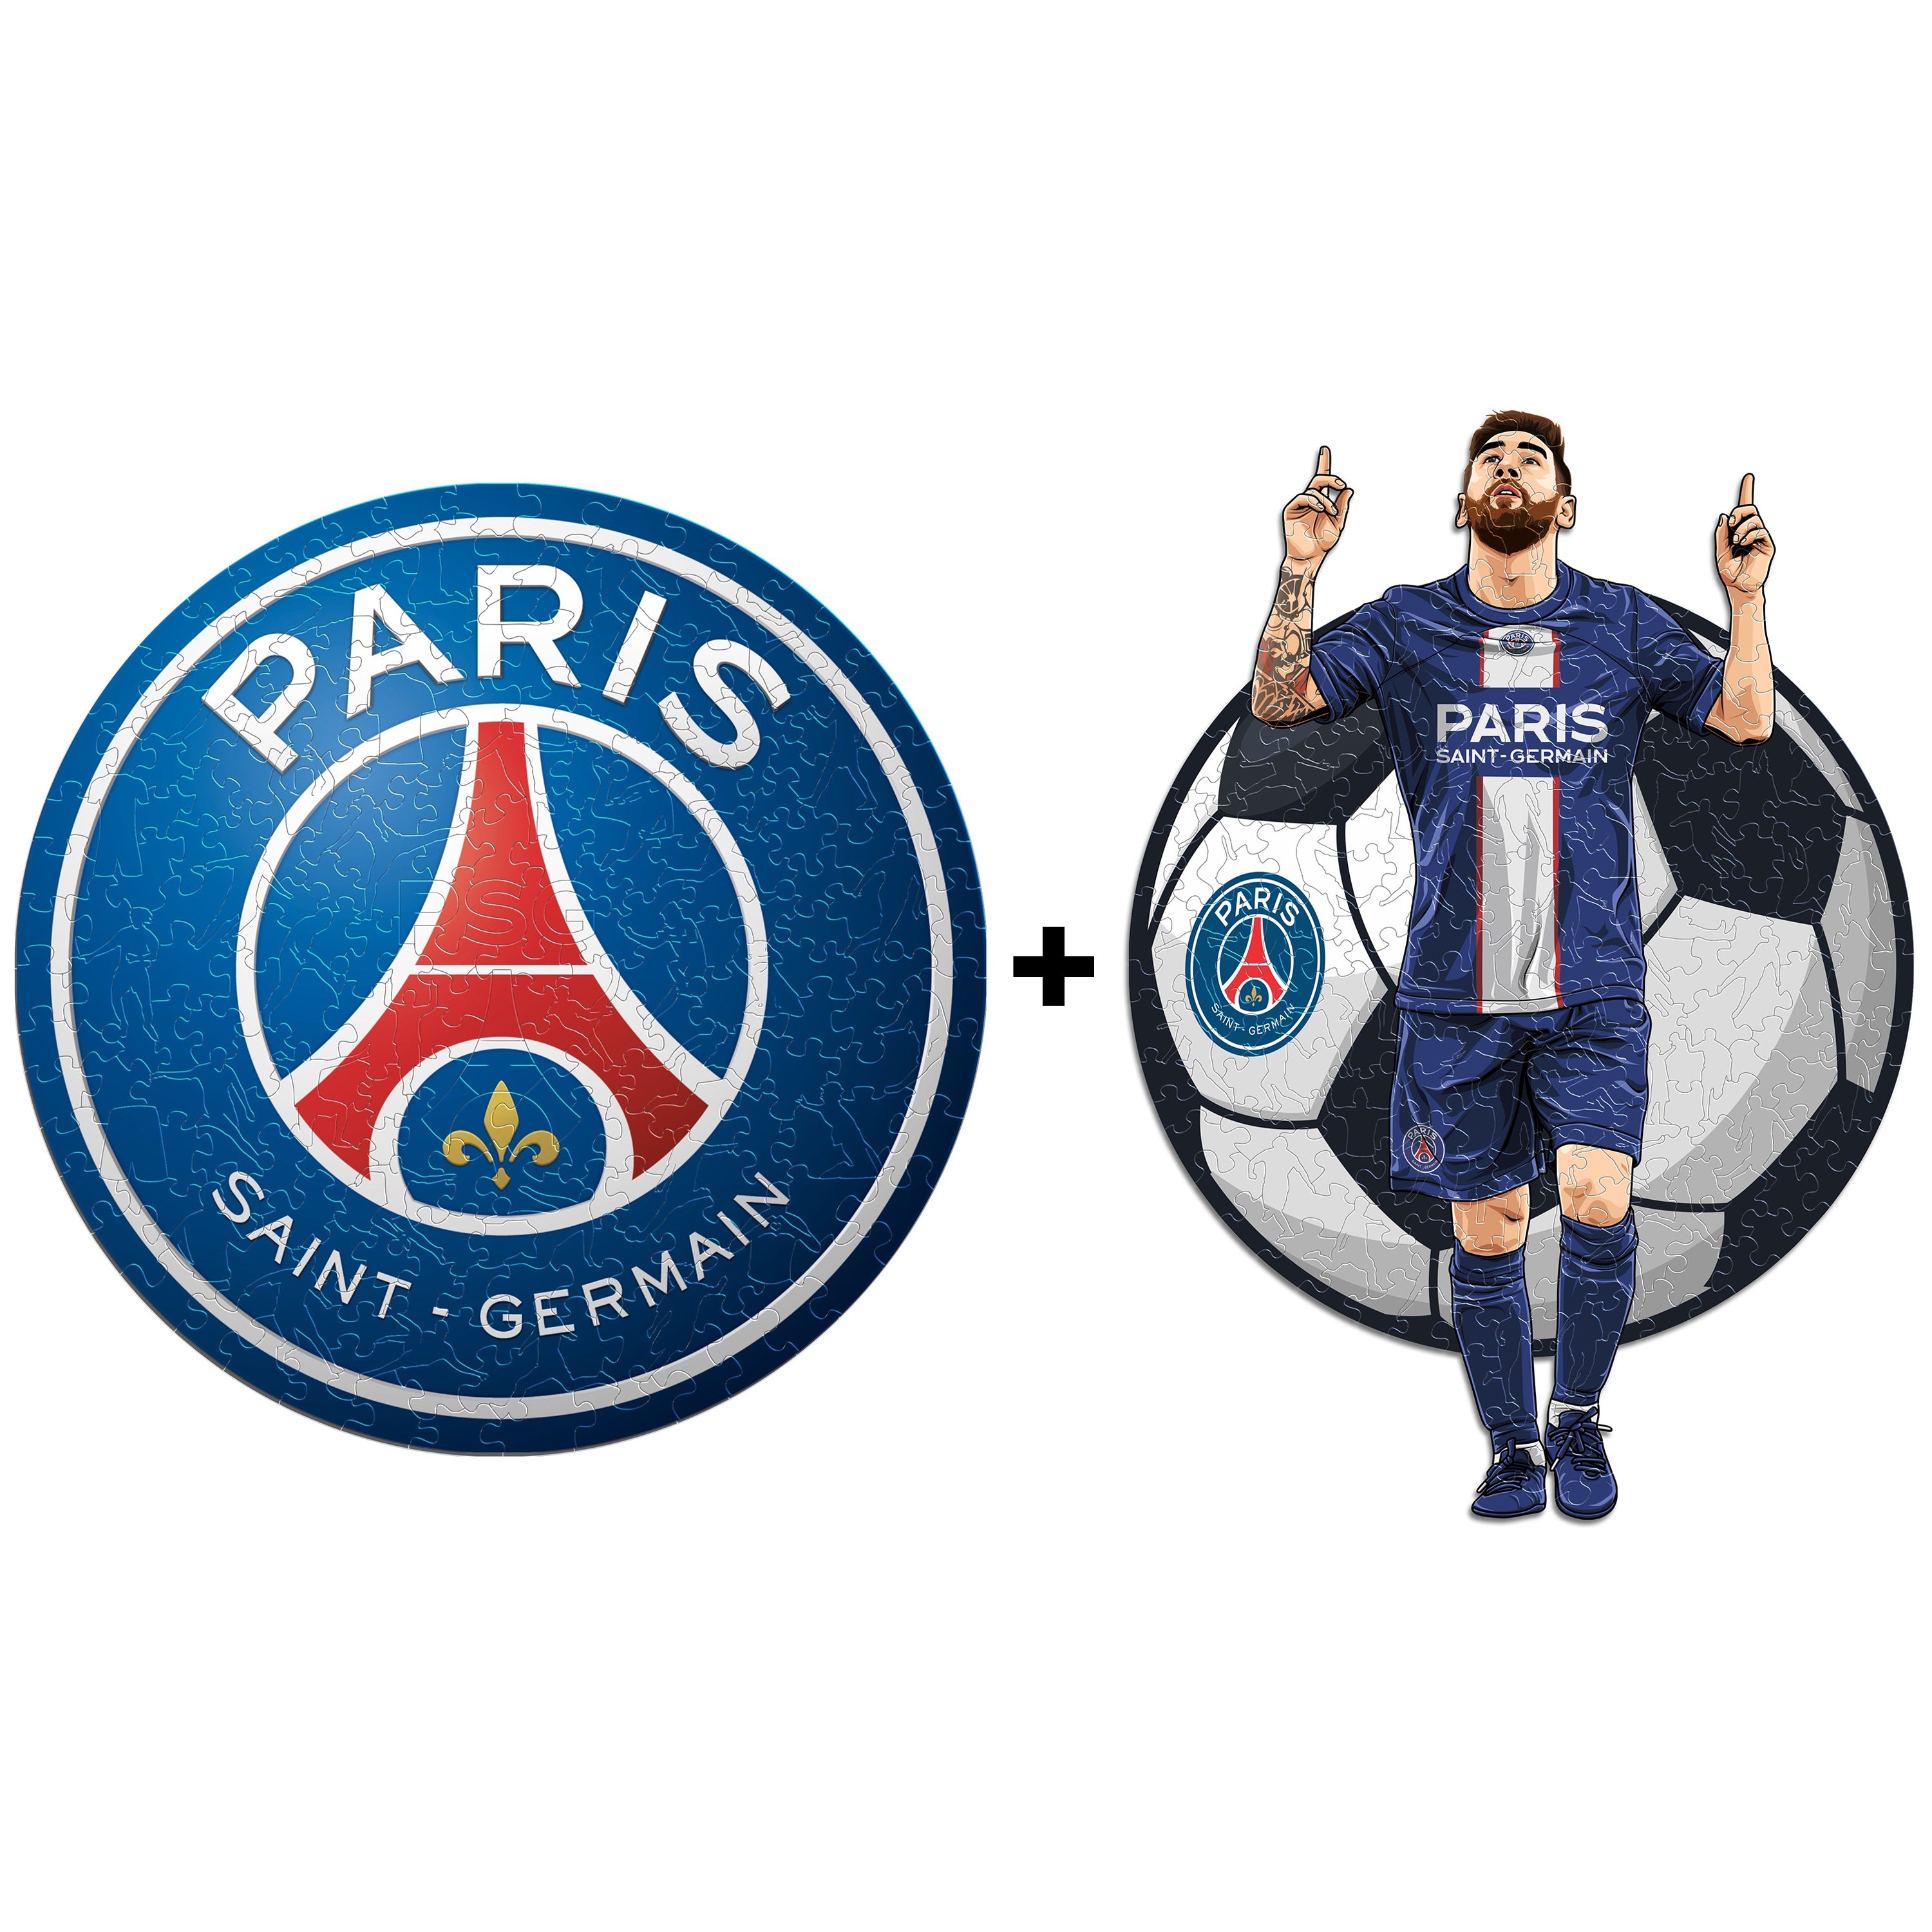 ⚽⚽ FOR ALL PSG AND FOOTBALL ⚽ LOVERS😍😍 HERE COMES PSG PARIS SAINT  GERMAIN 1000 PCS PUZZLE AND MAGNETS AND POSTER ALSO LOTS OF OTHER 2 IN 1  3 IN, By The Goodie Bag